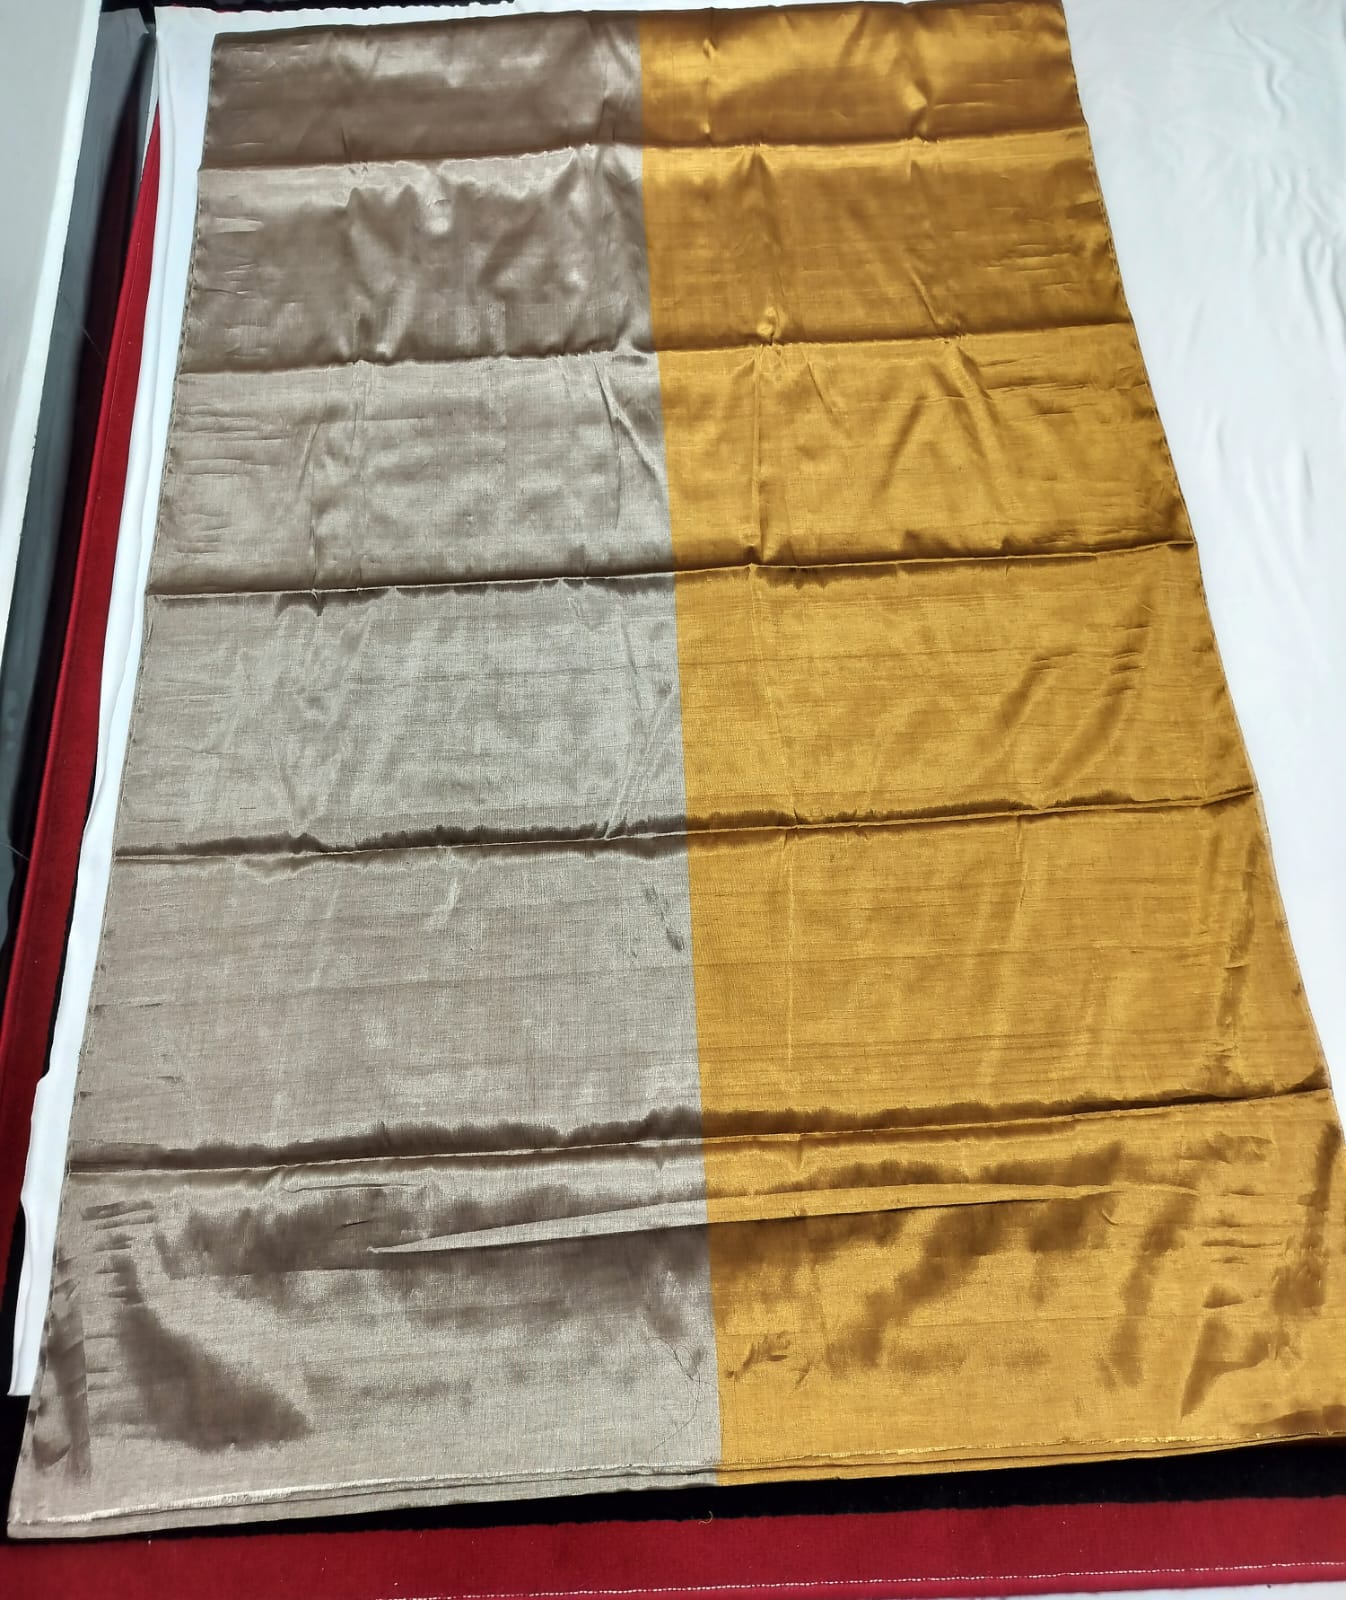 Handloom Chanderi Tissue Saree for Wedding and Festive Occasions